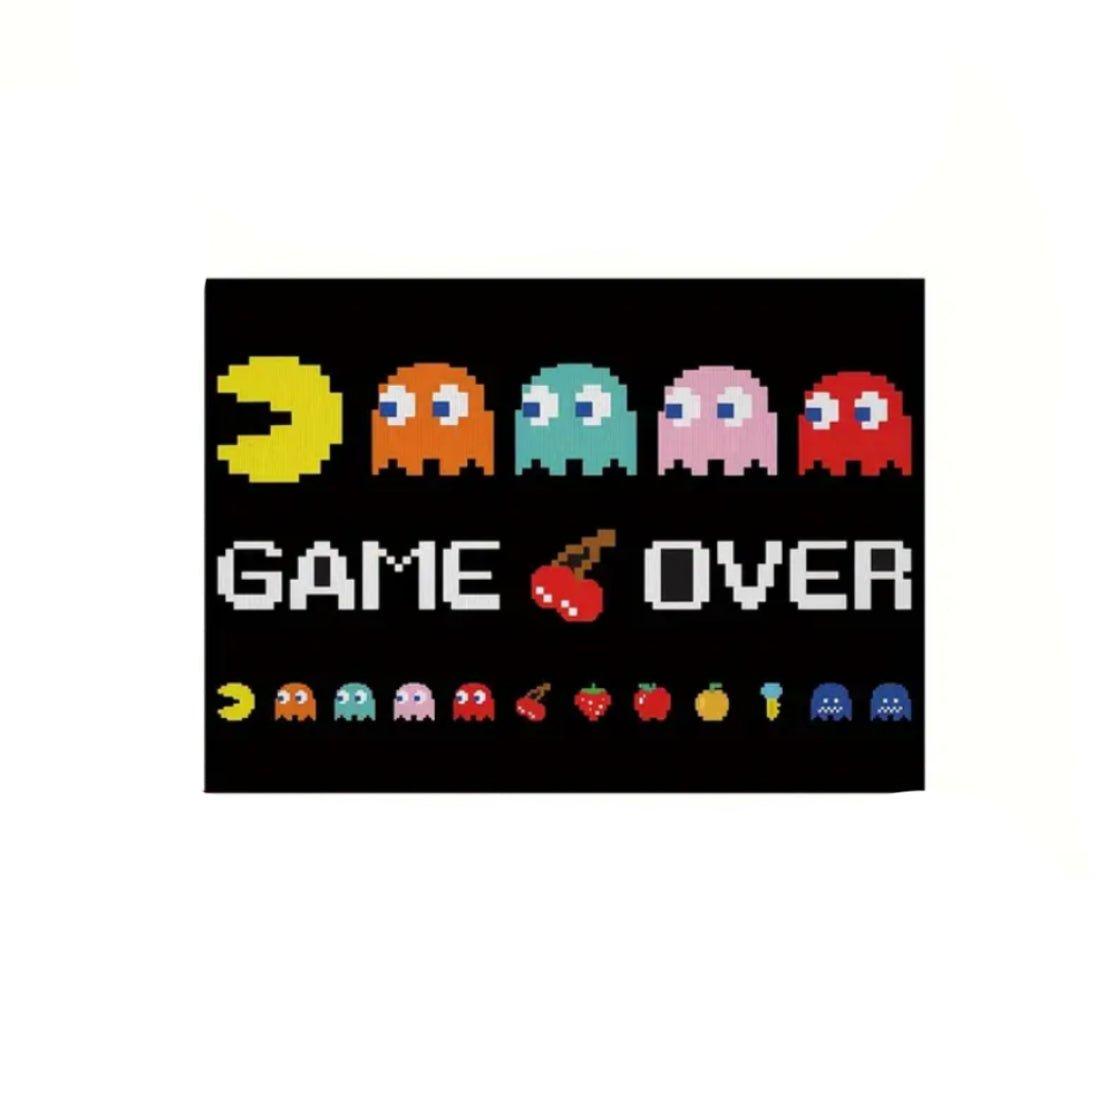 Game Room Game Over Wall Art Poster (40x1x60cm) - 1 Piece - ملصق - Store 974 | ستور ٩٧٤